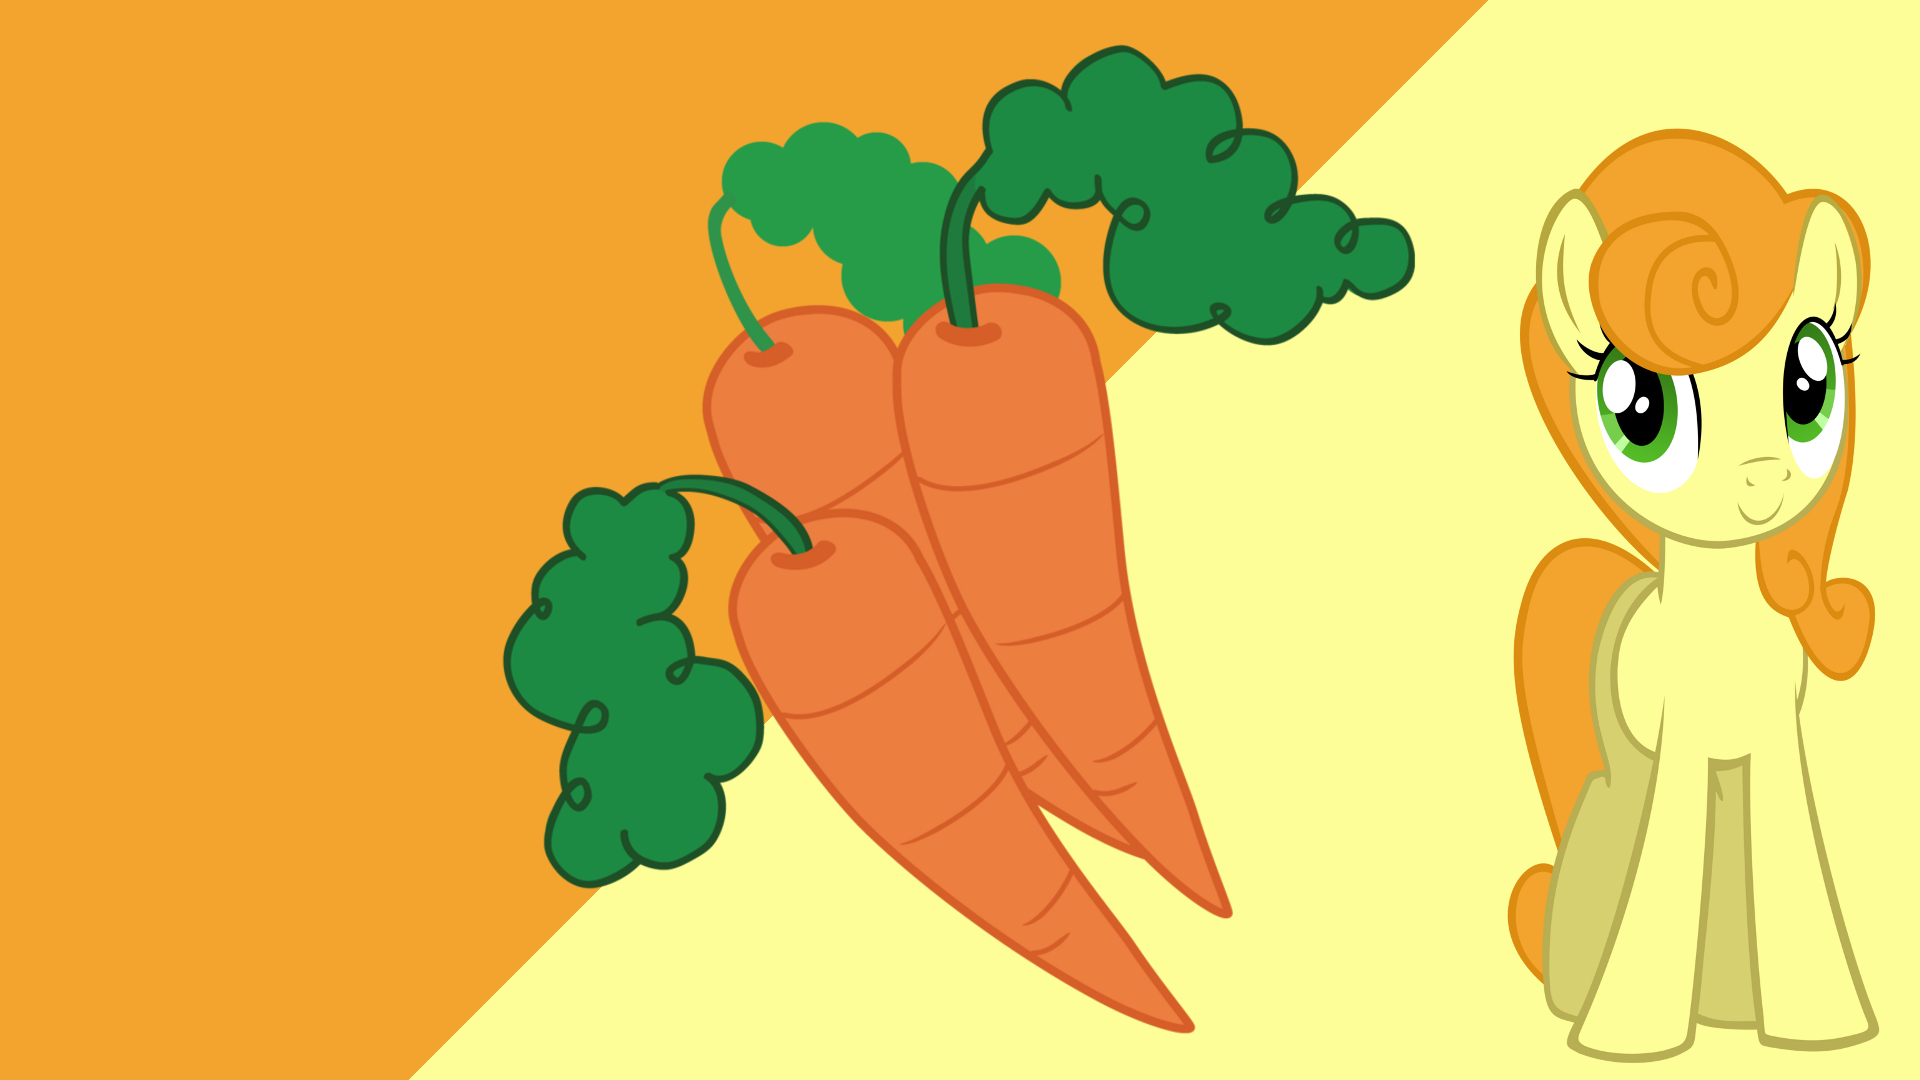 Minimalist Wallpaper 22: Carrot Top by Geogo999, ooklah and Softfang